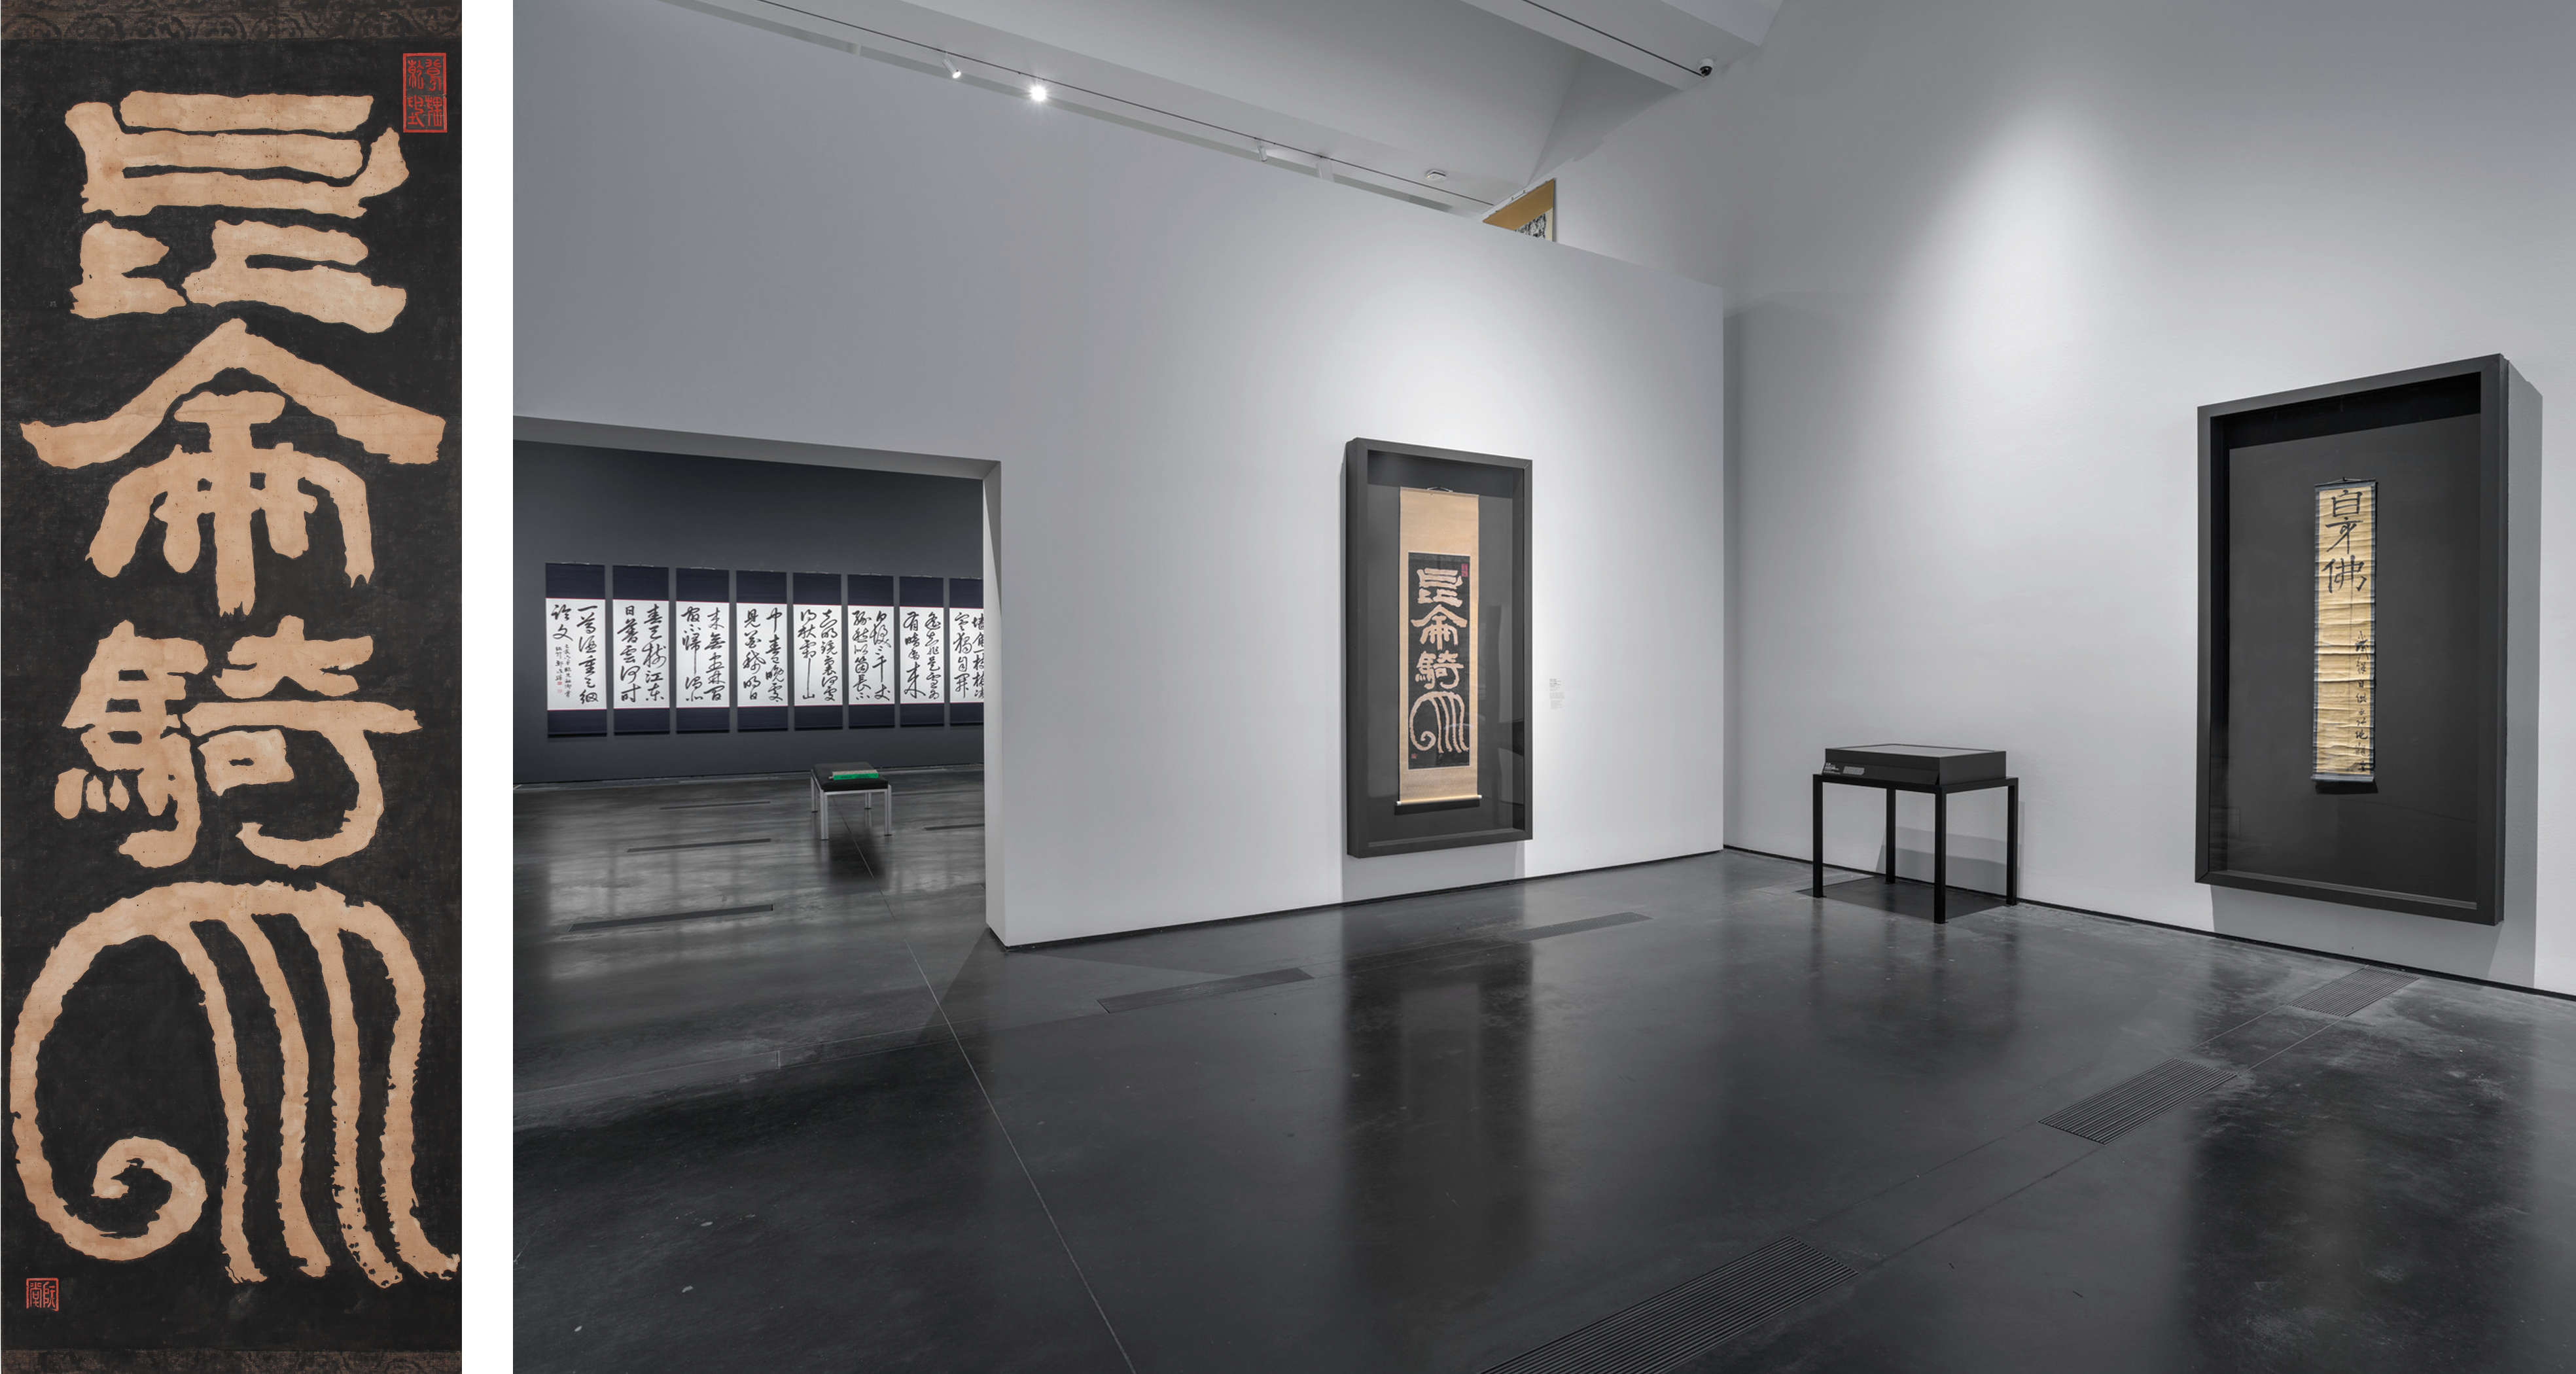 Left: Gim Jeonghui, Mount Gonryun Rides on an Elephant, Joseon dynasty, 19th century, Yi Sejong Collection; Right: Installation photograph of the exhibition Beyond Line: The Art of Korean Writing, at the Los Angeles County Museum of Art, June 16–September 29, 2019, photo © Museum Associates/LACMA